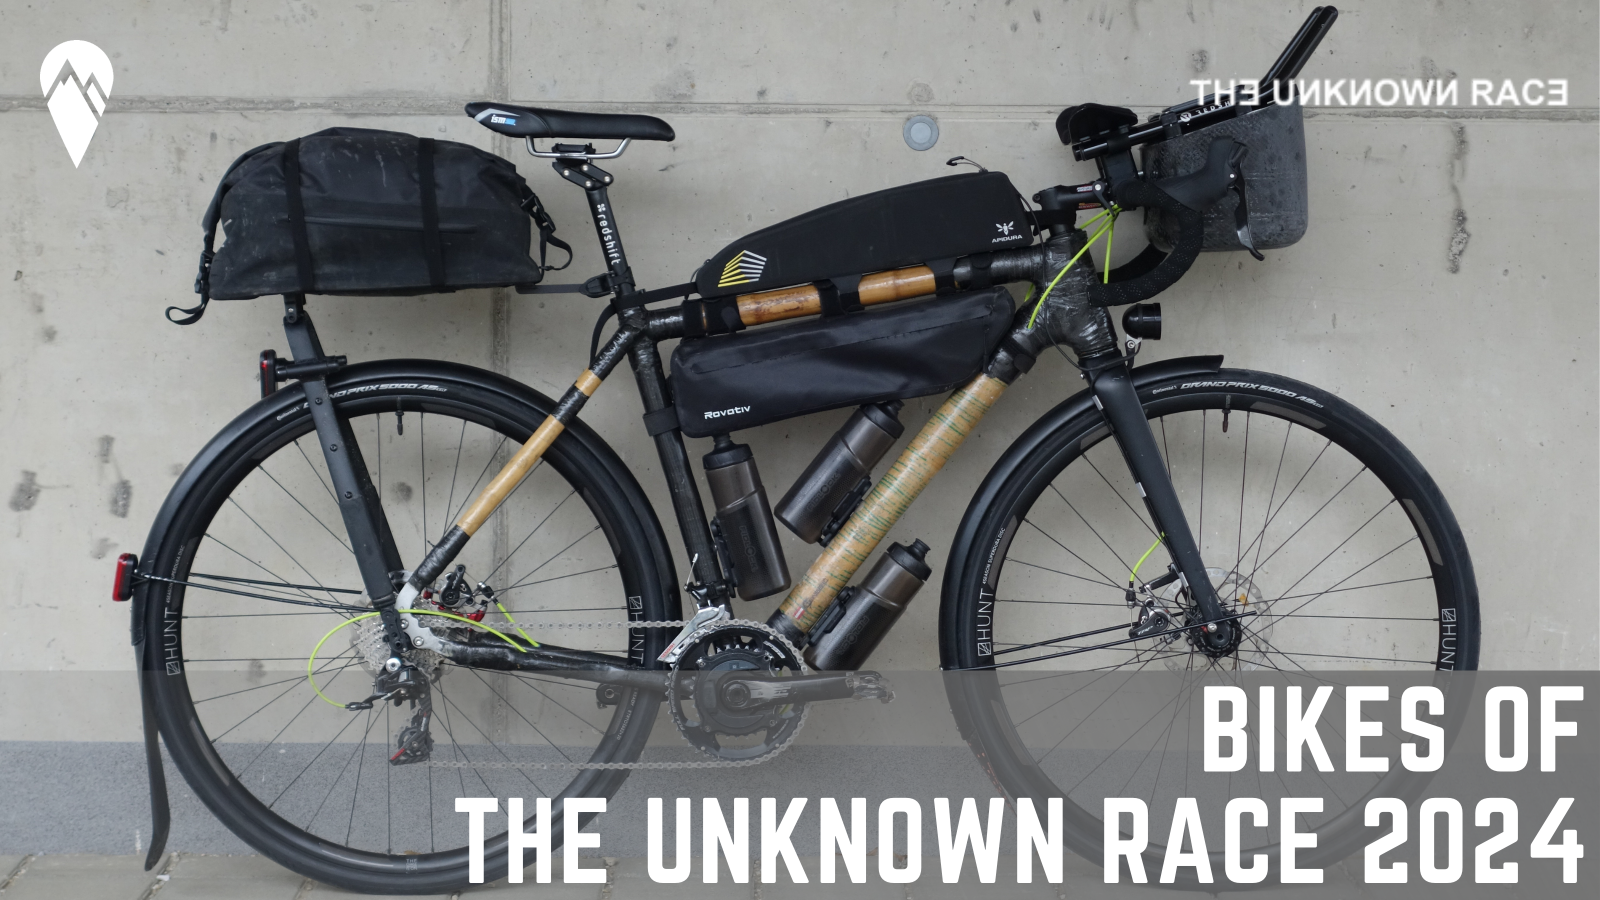 Bikes of The Unknown Race 2024